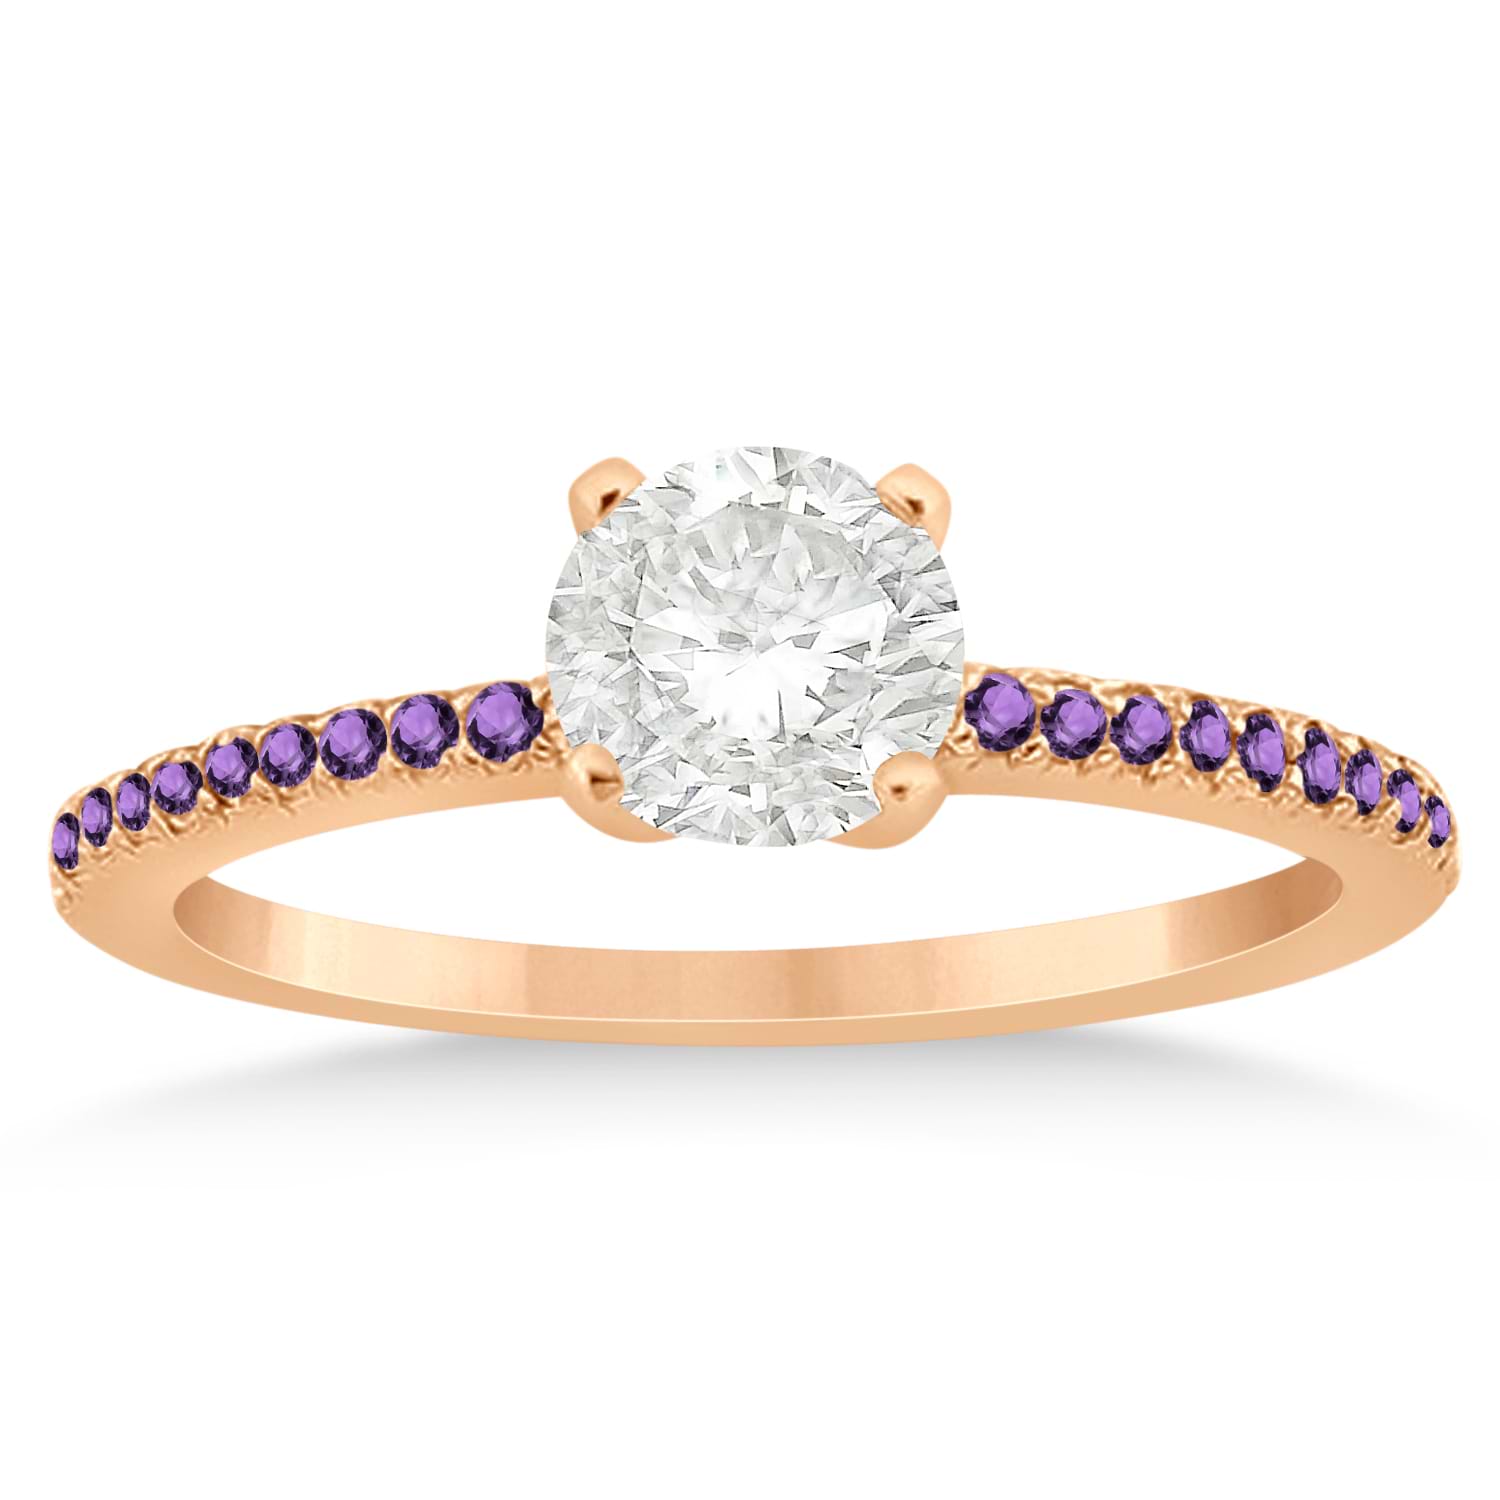 Amethyst Accented Engagement Ring Setting 18k Rose Gold 0.18ct